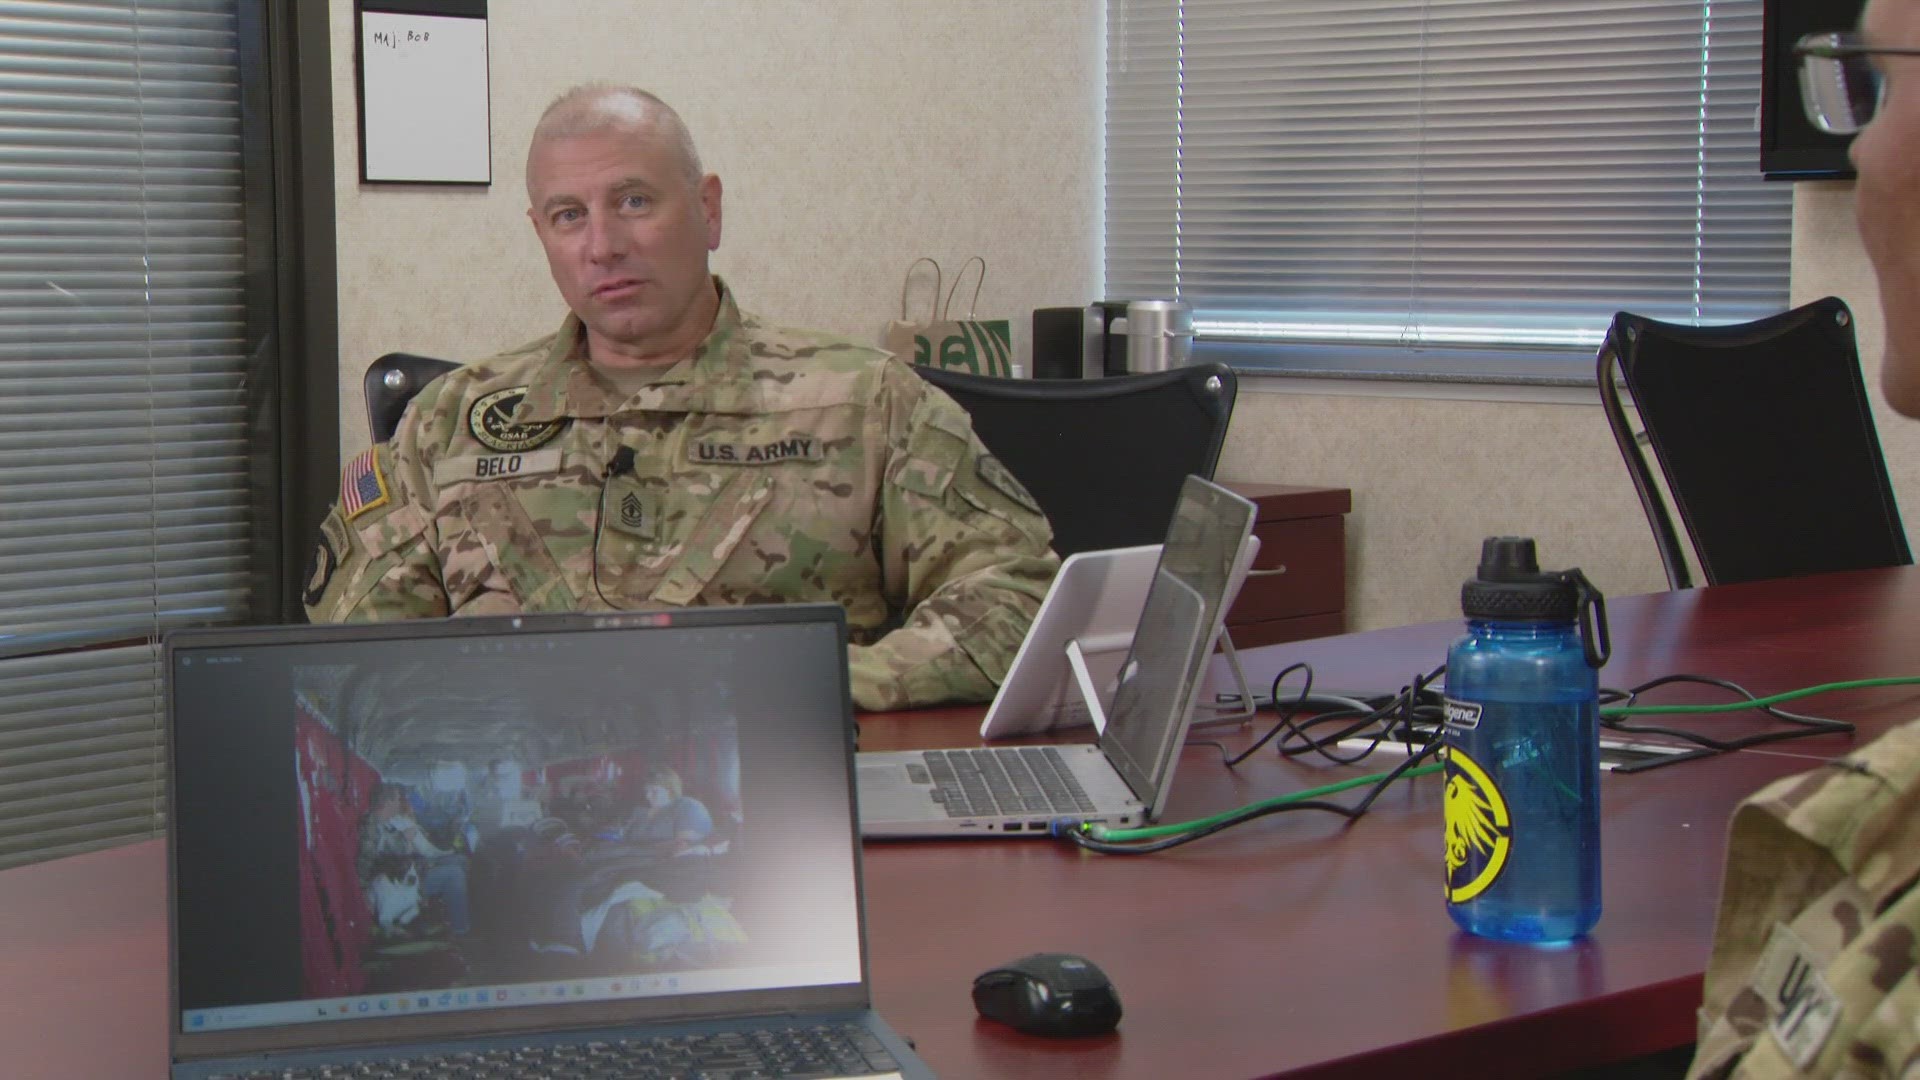 We hear stories from some of the National Guard members who helped get people to safety in the 2013 flooding.